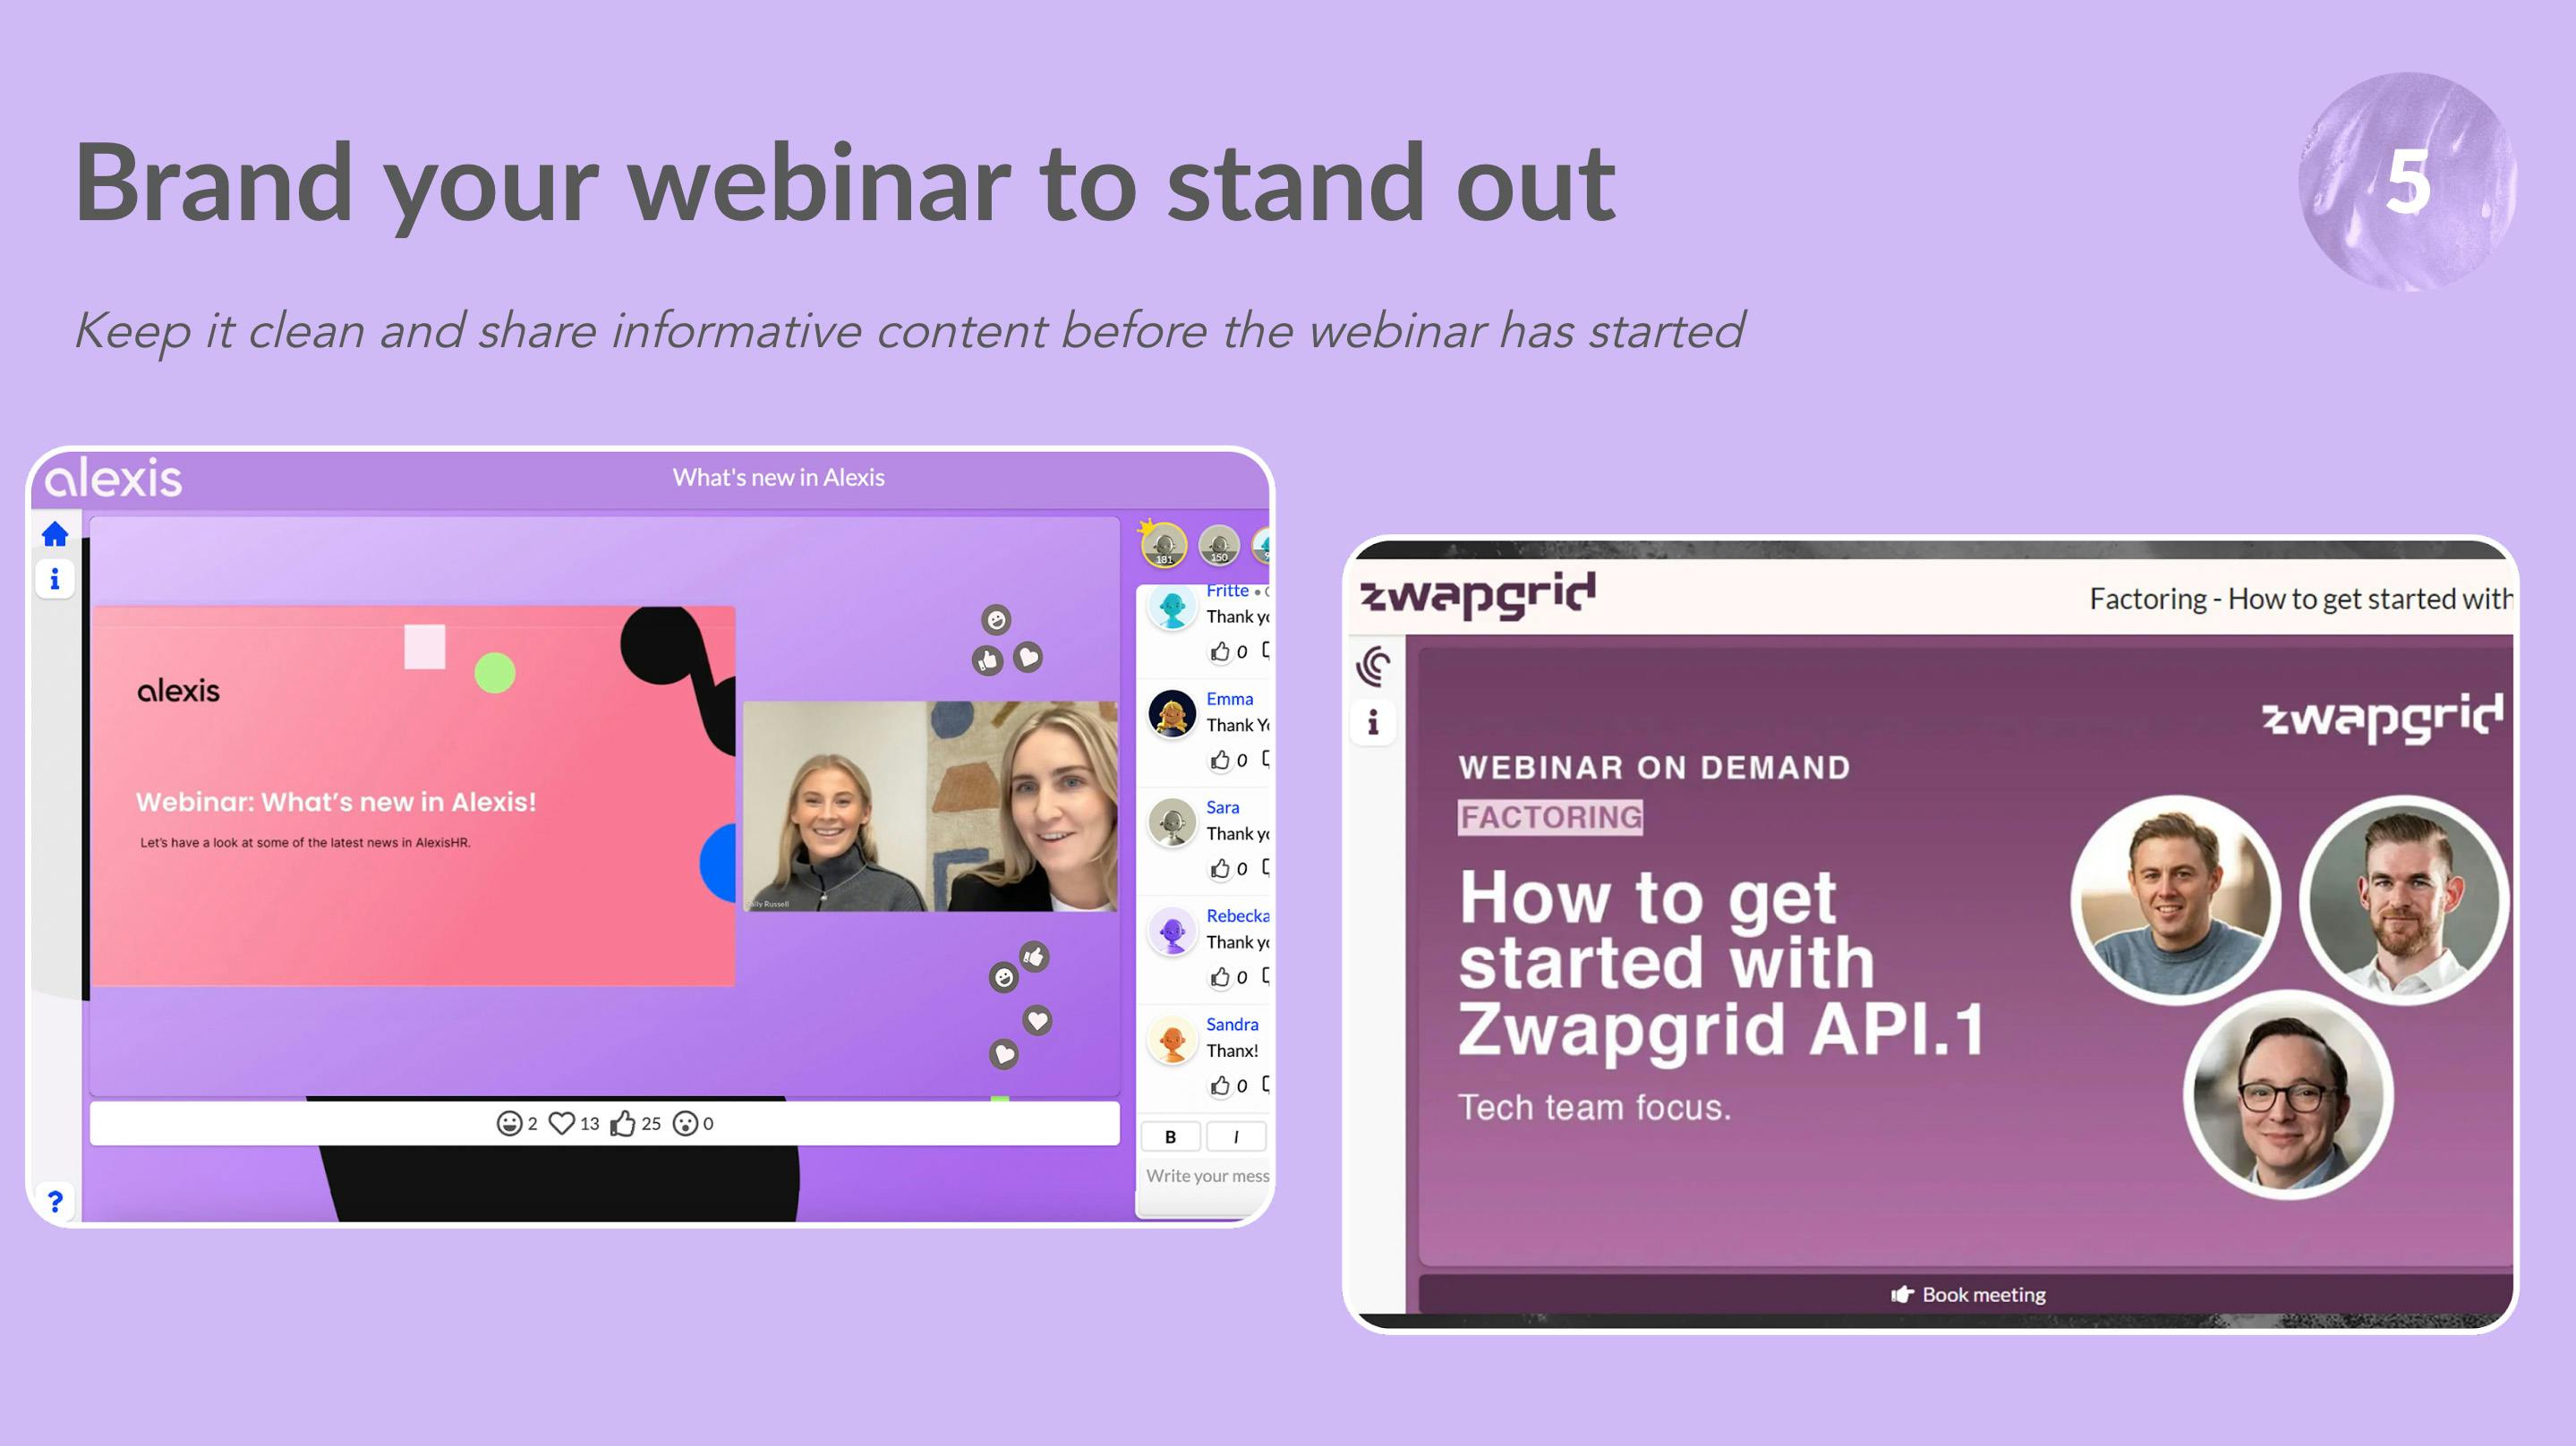 Brand your webinars to stand out